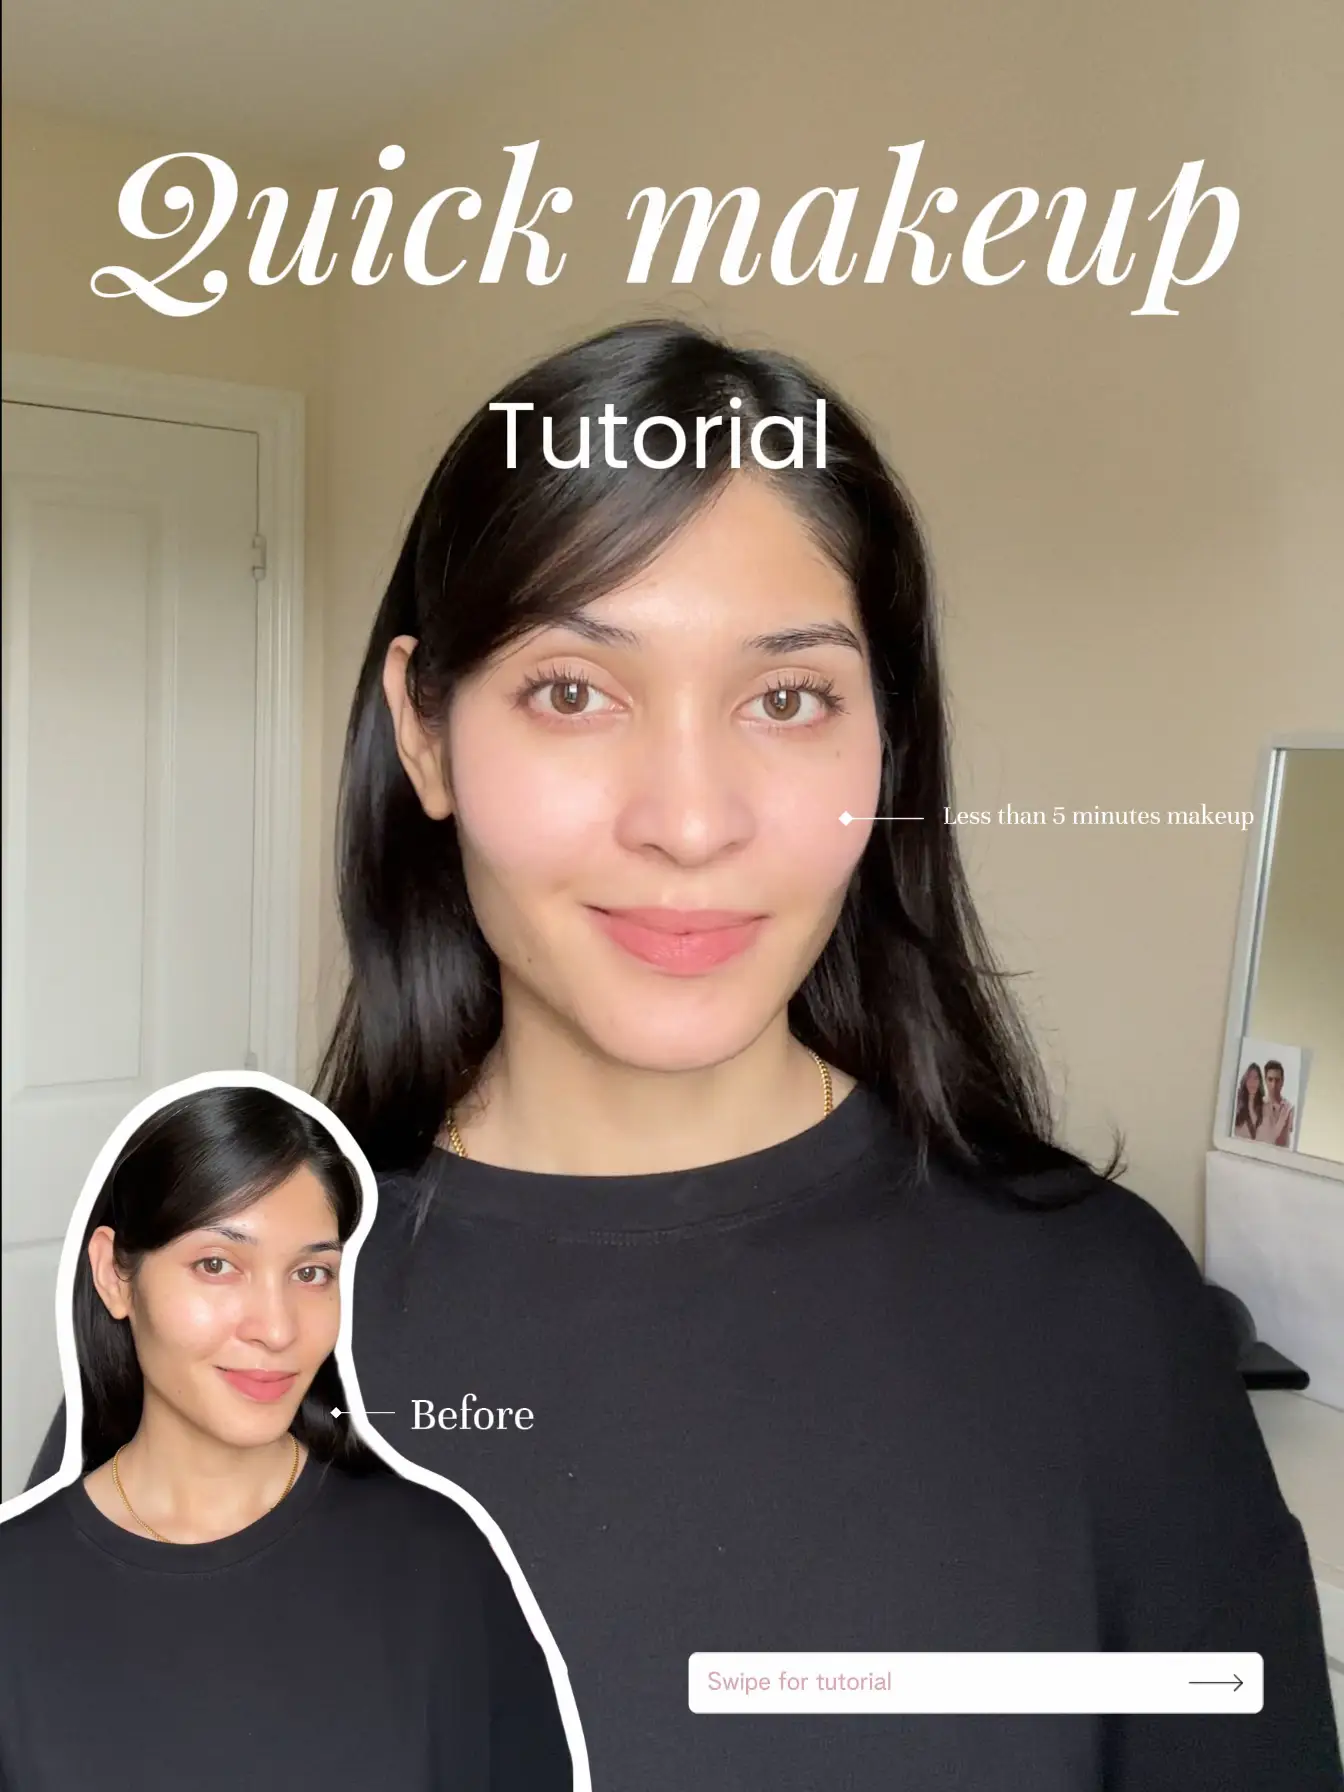 My 5 minutes makeup tutorial, Gallery posted by Syahirah